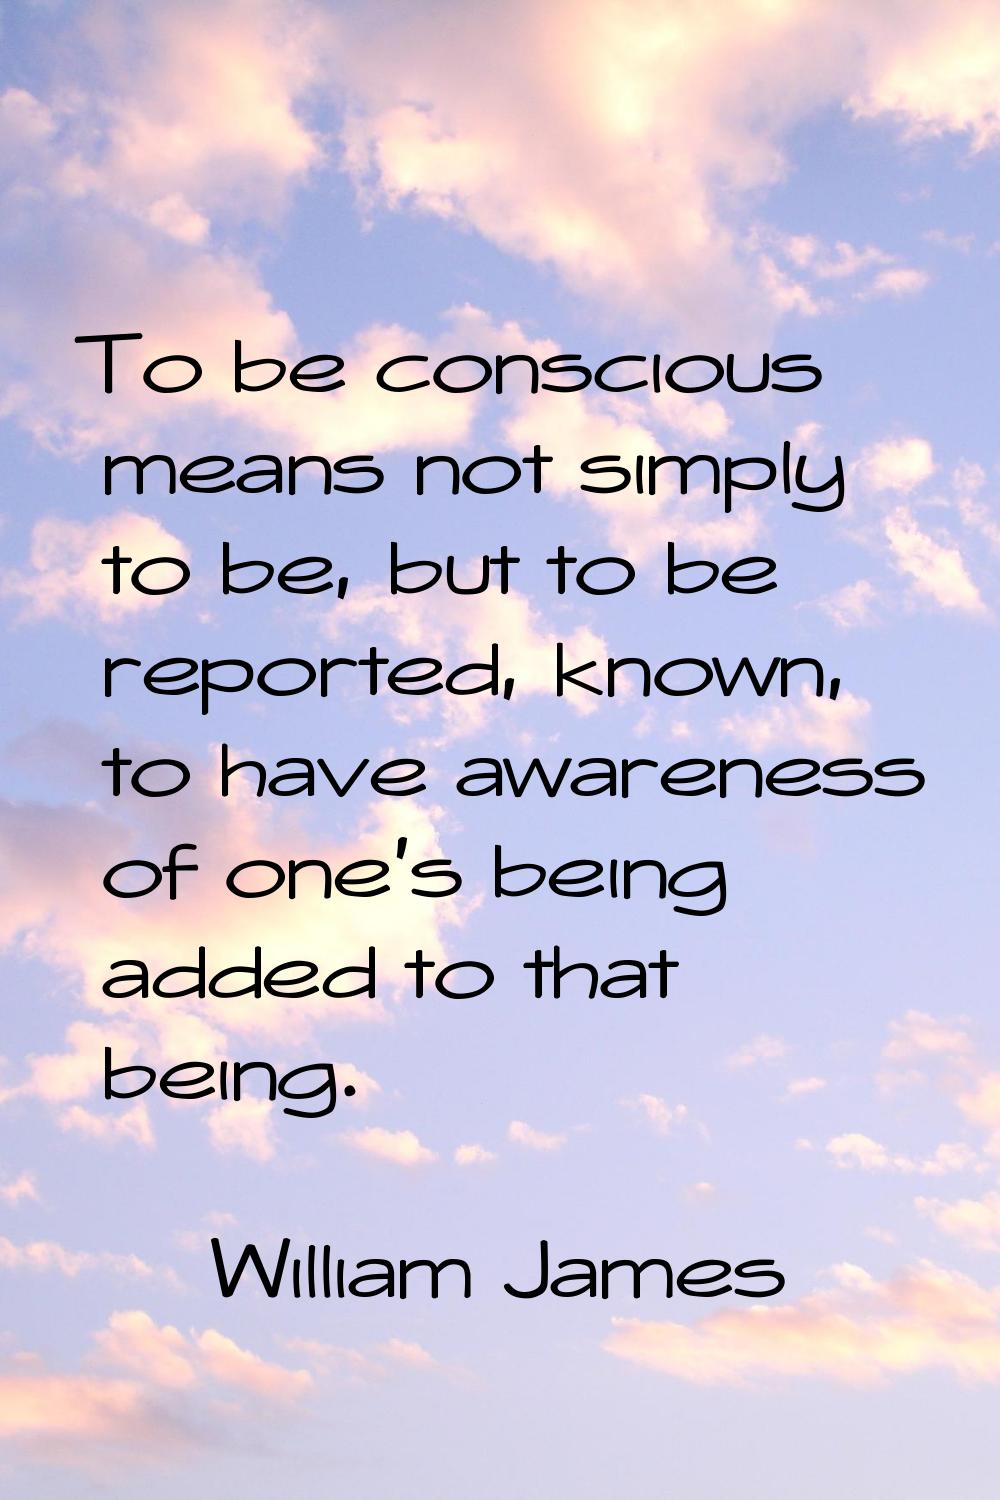 To be conscious means not simply to be, but to be reported, known, to have awareness of one's being